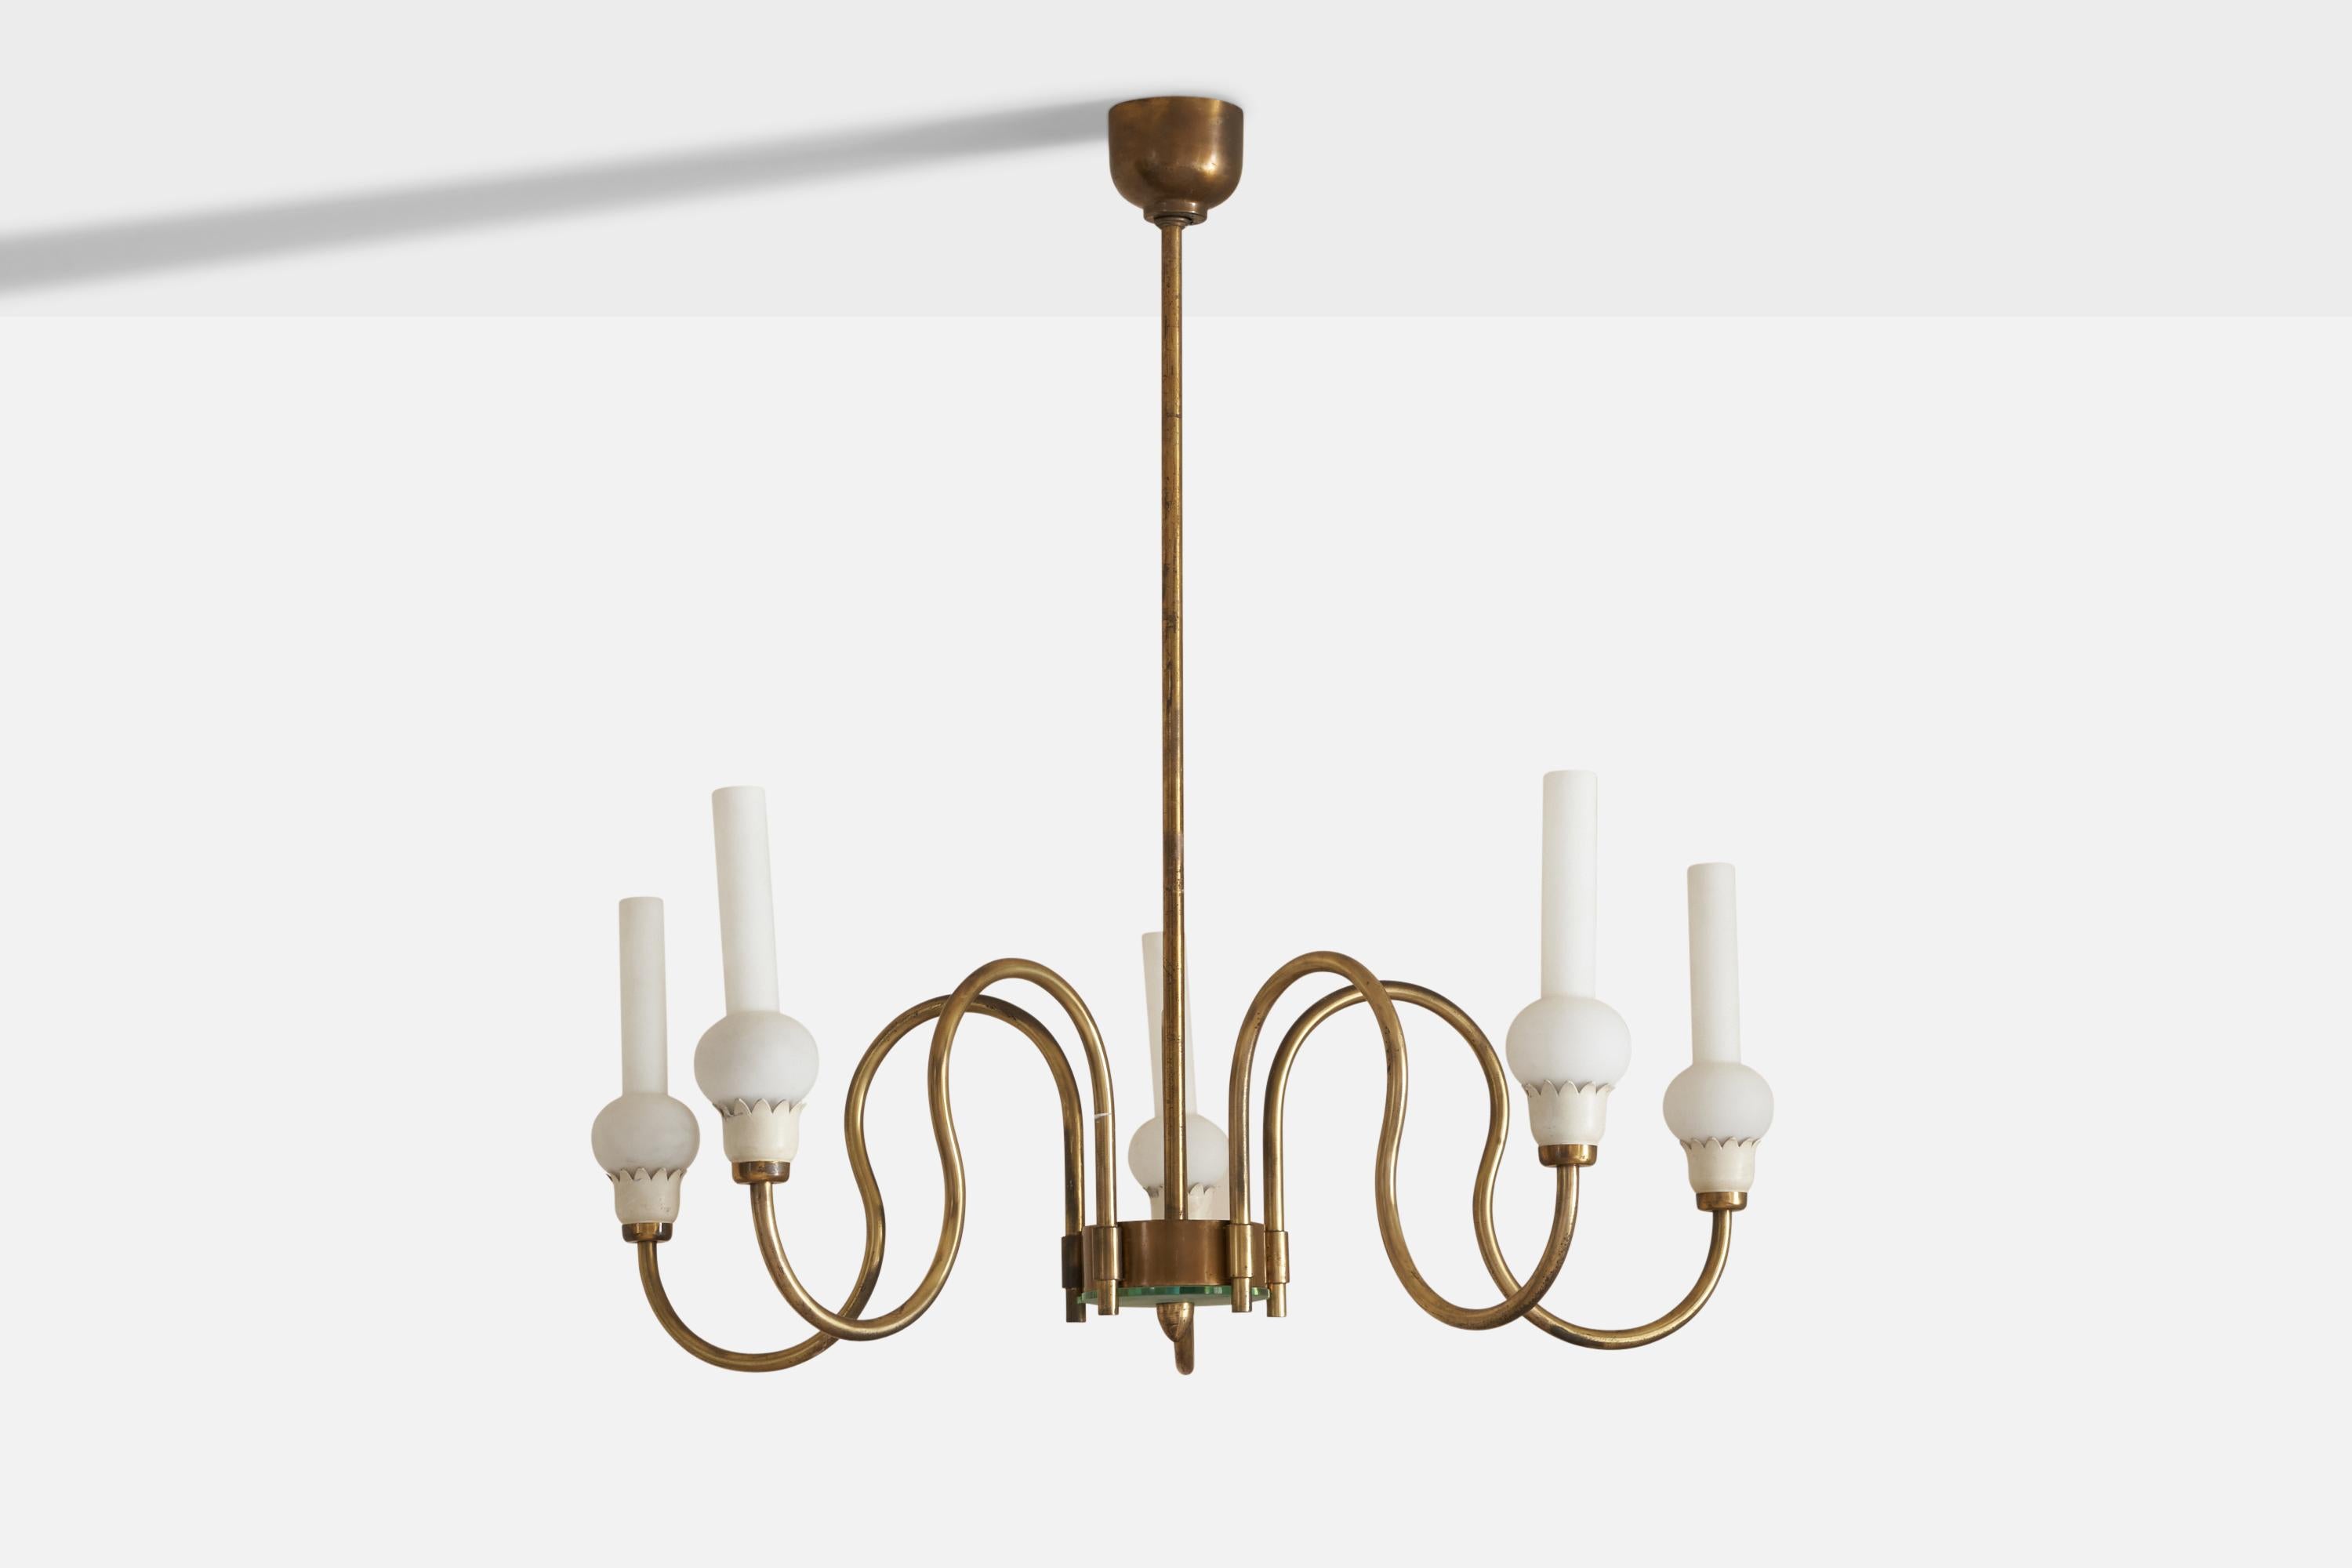 A sizeable brass, white-lacquered metal, opaline and blue-coloured glass chandelier designed and produced in Italy, 1940s.

Overall Dimensions (inches): 46” H x 43” Diameter 
Bulb Specifications: E-26 Bulb
Number of Sockets: 5
Additional sockets